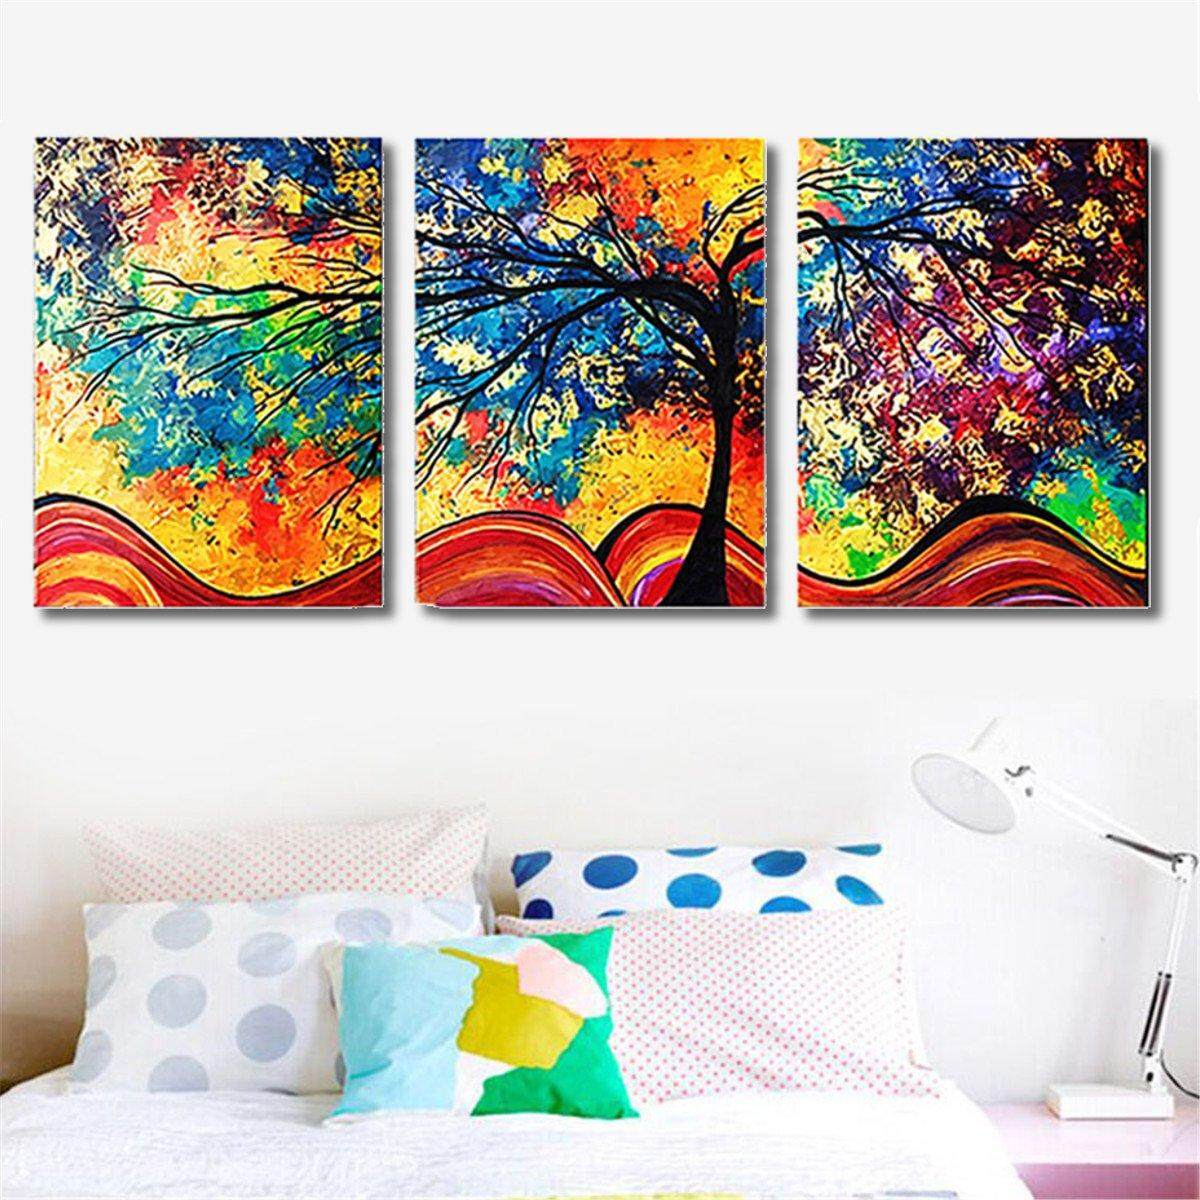 3Pcs Abstract Colorful Tree Canvas Print Art Painting Picture Home Decor Framed